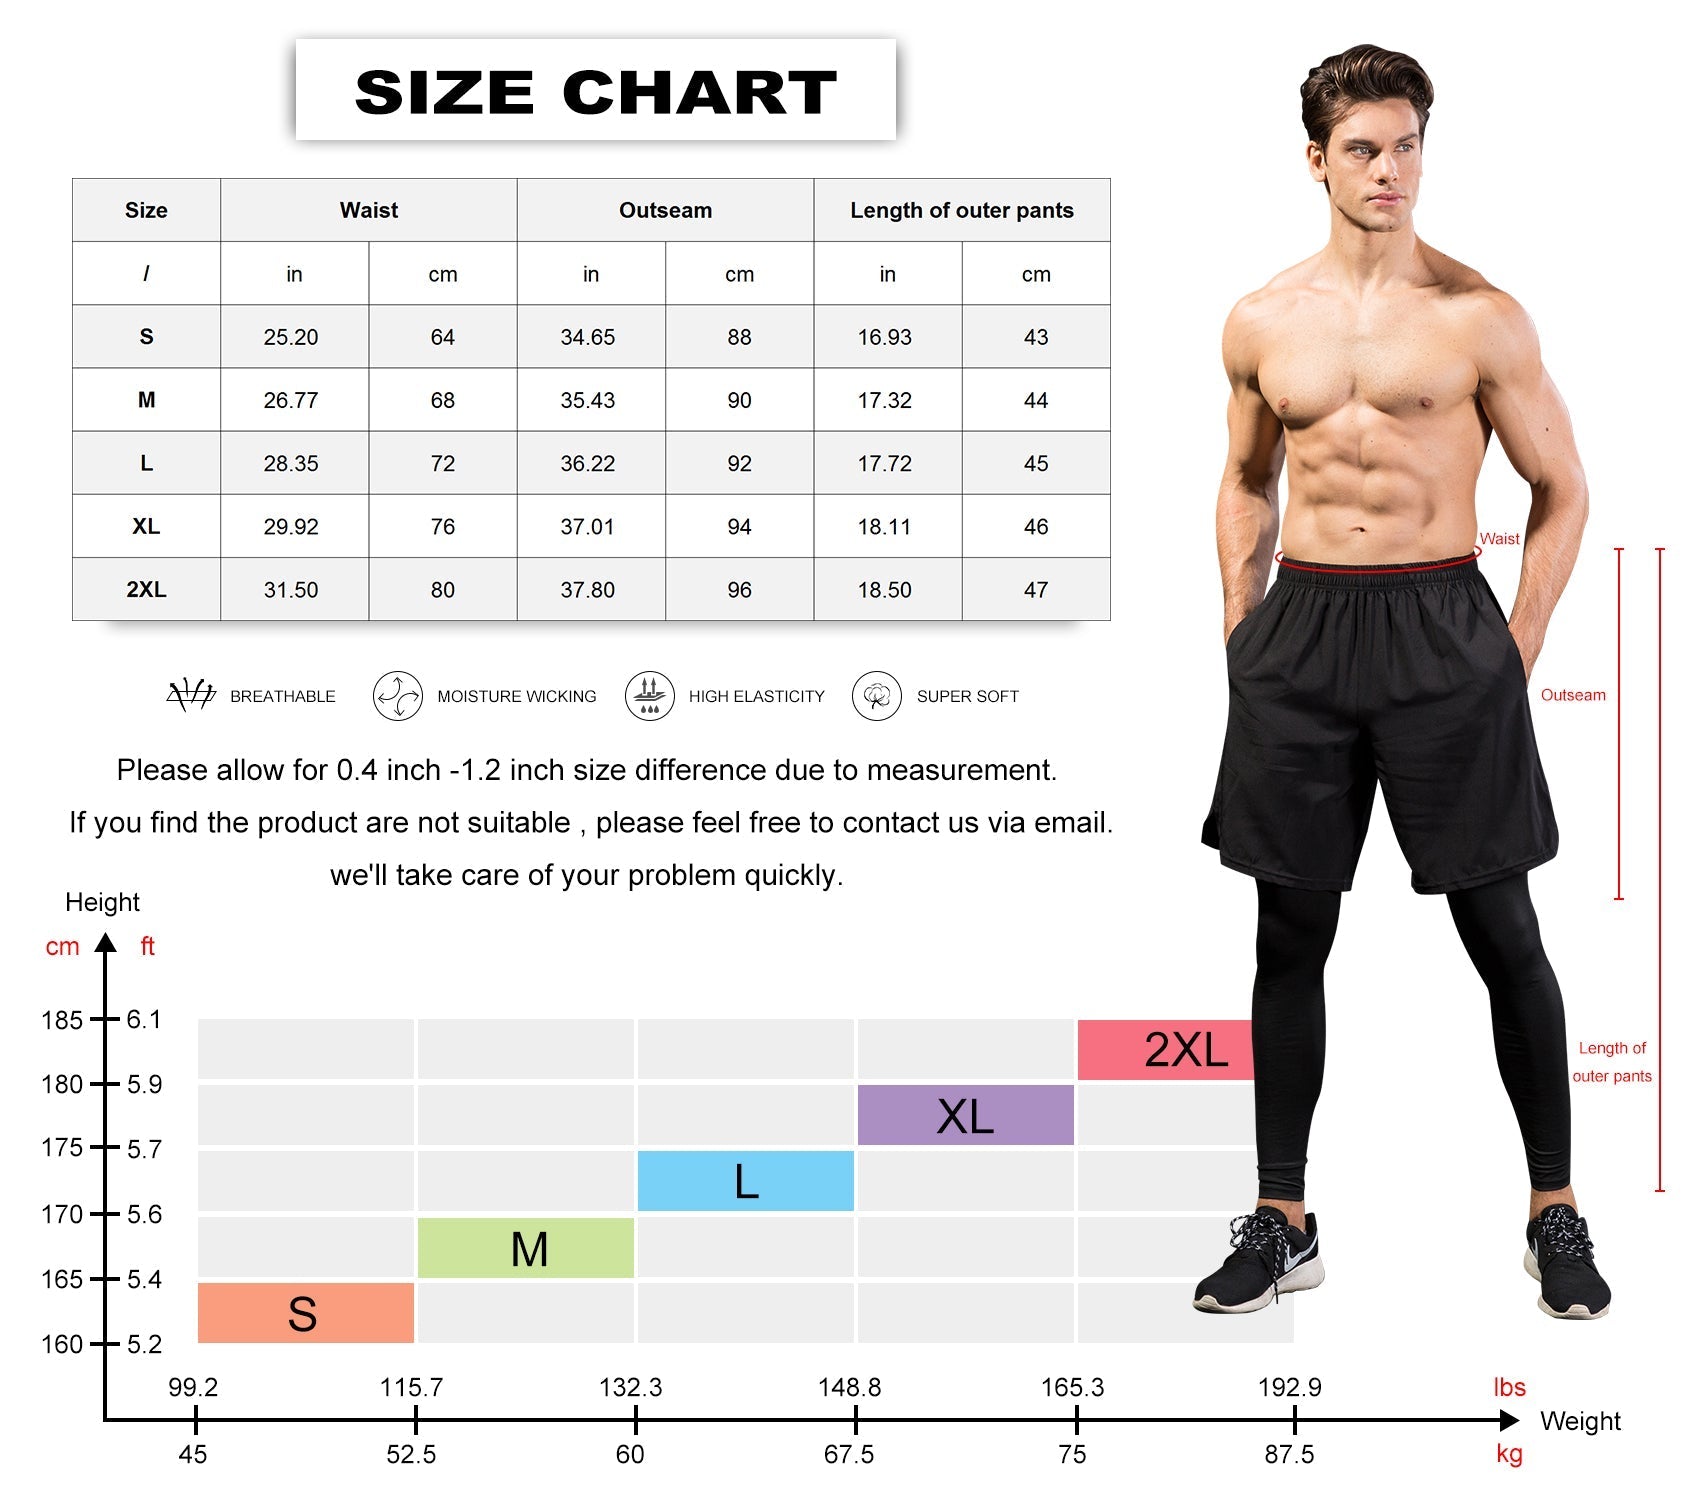 Mens 2 in 1 Compression Pants Running leggings Workout Shorts with Pockets LANBAOSI